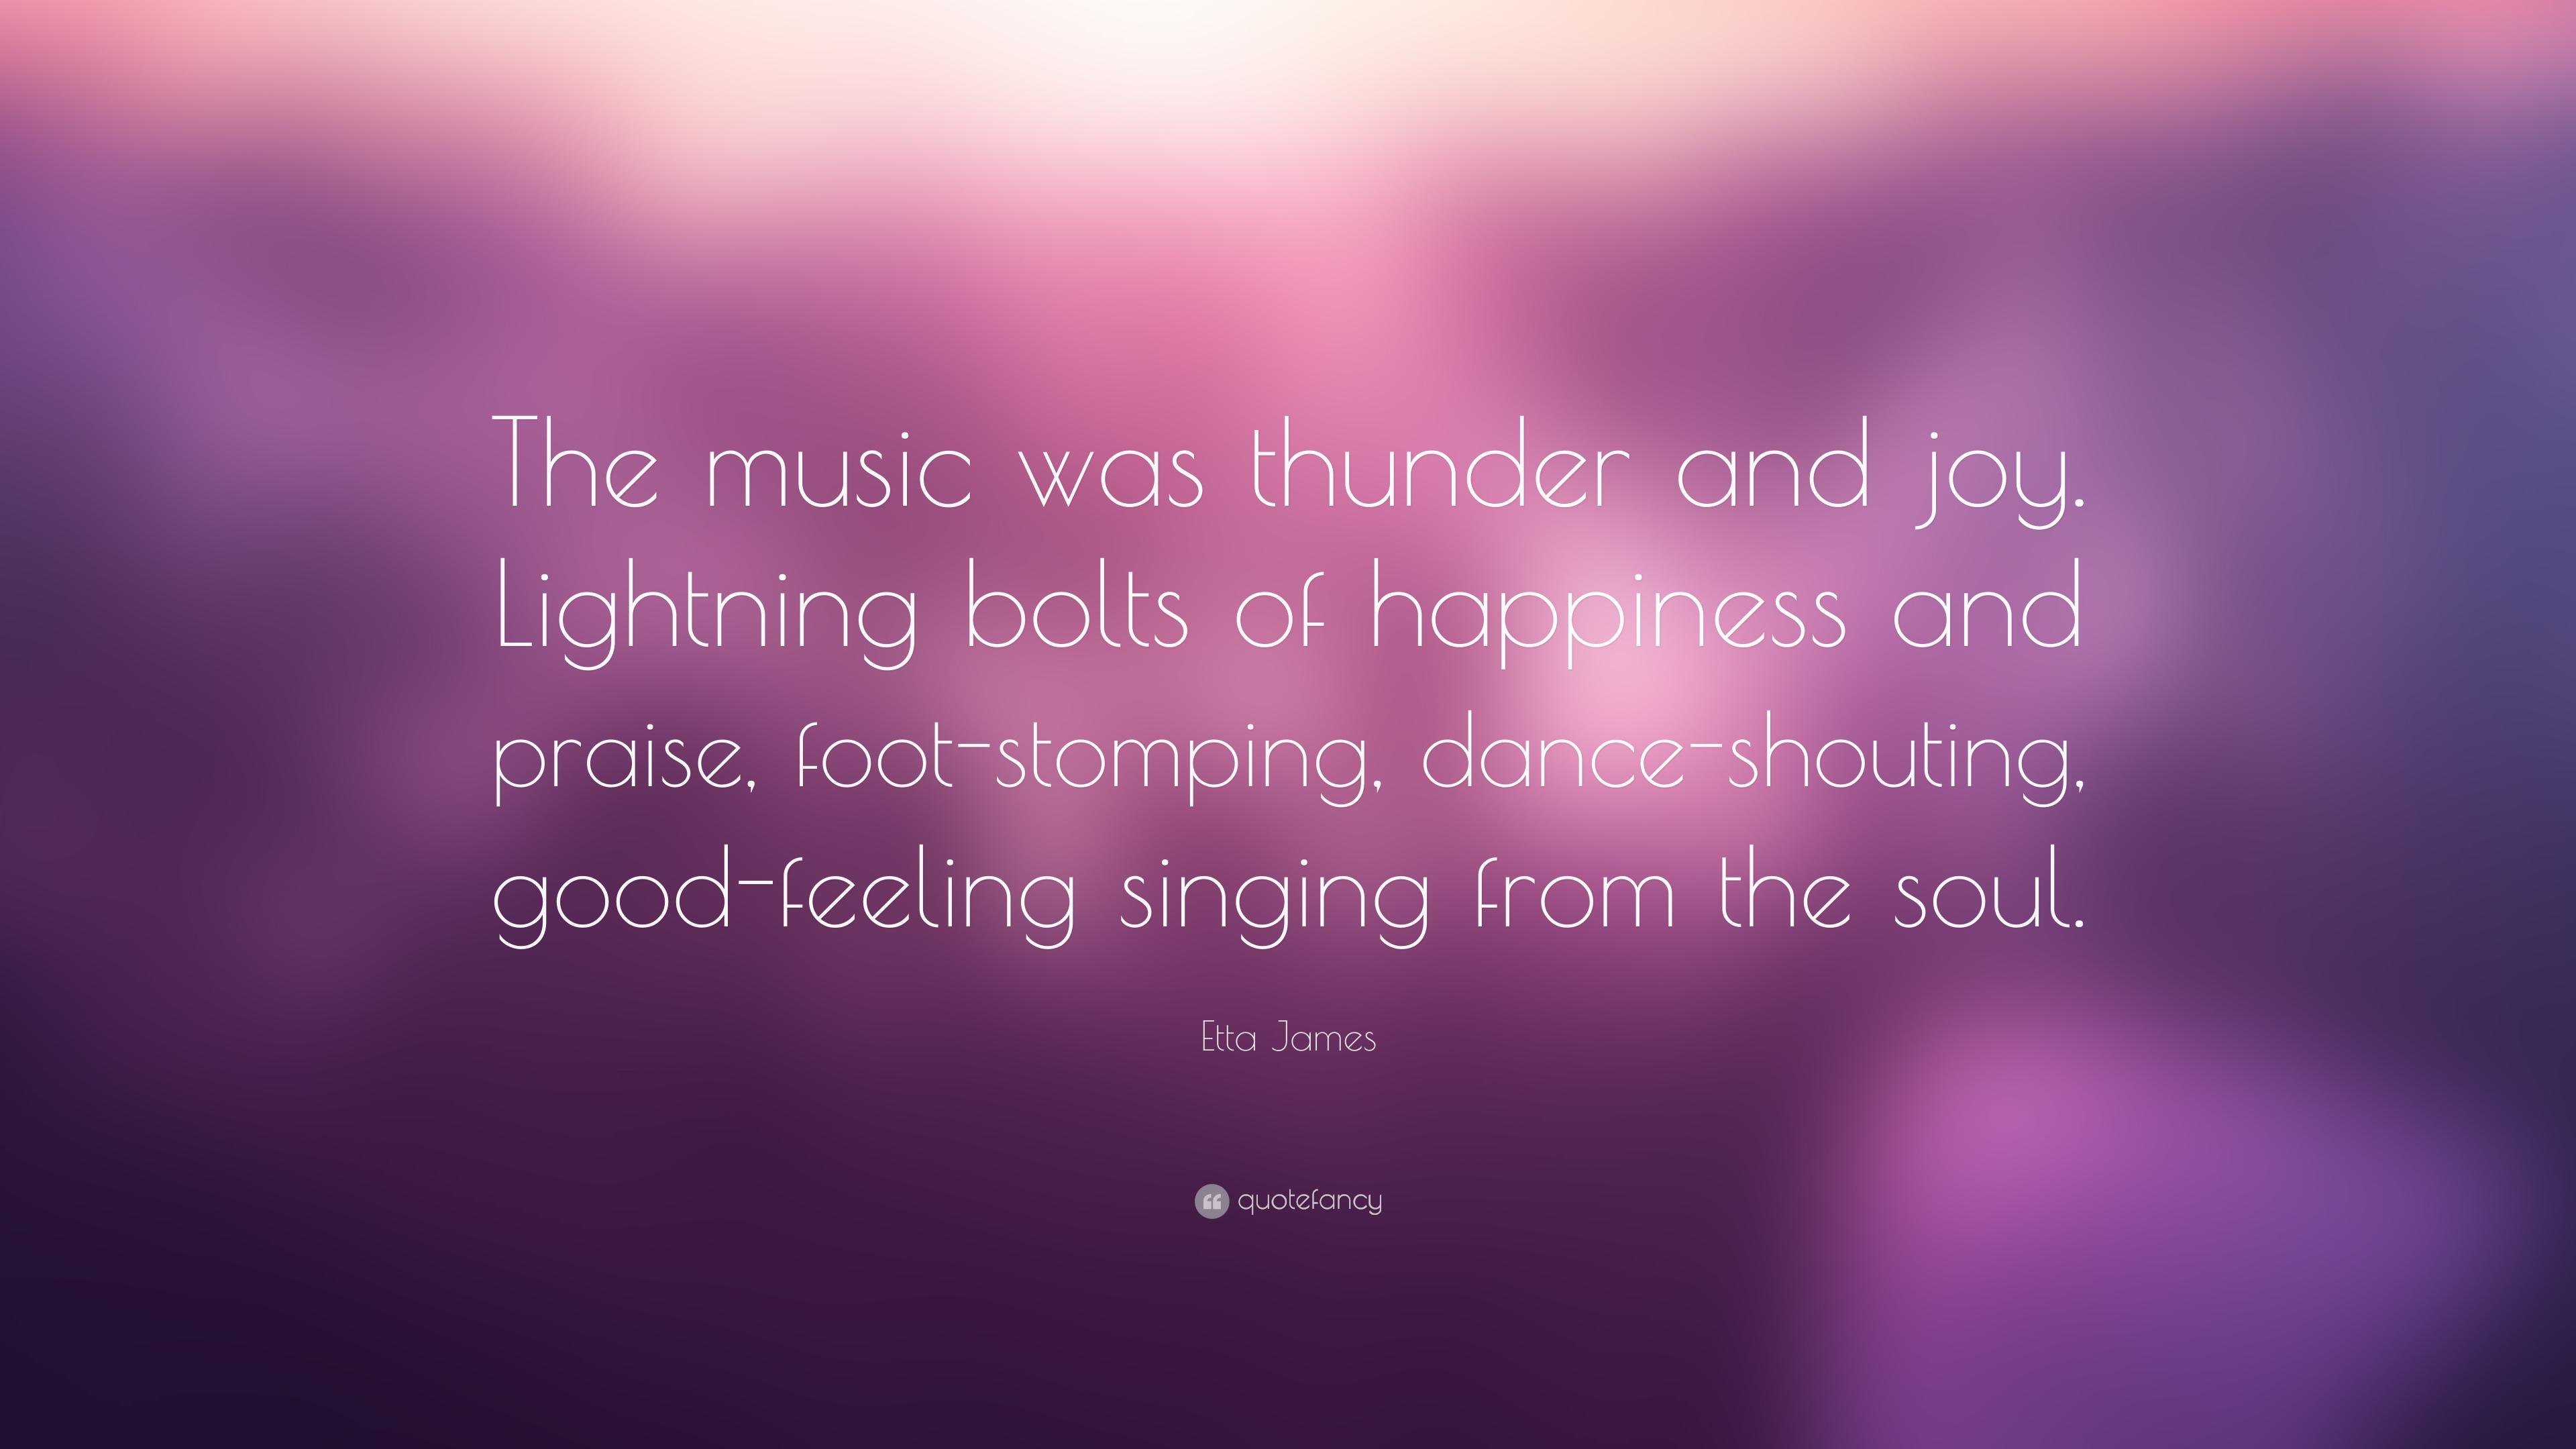 Etta James Quote: “The music was thunder and joy. Lightning bolts